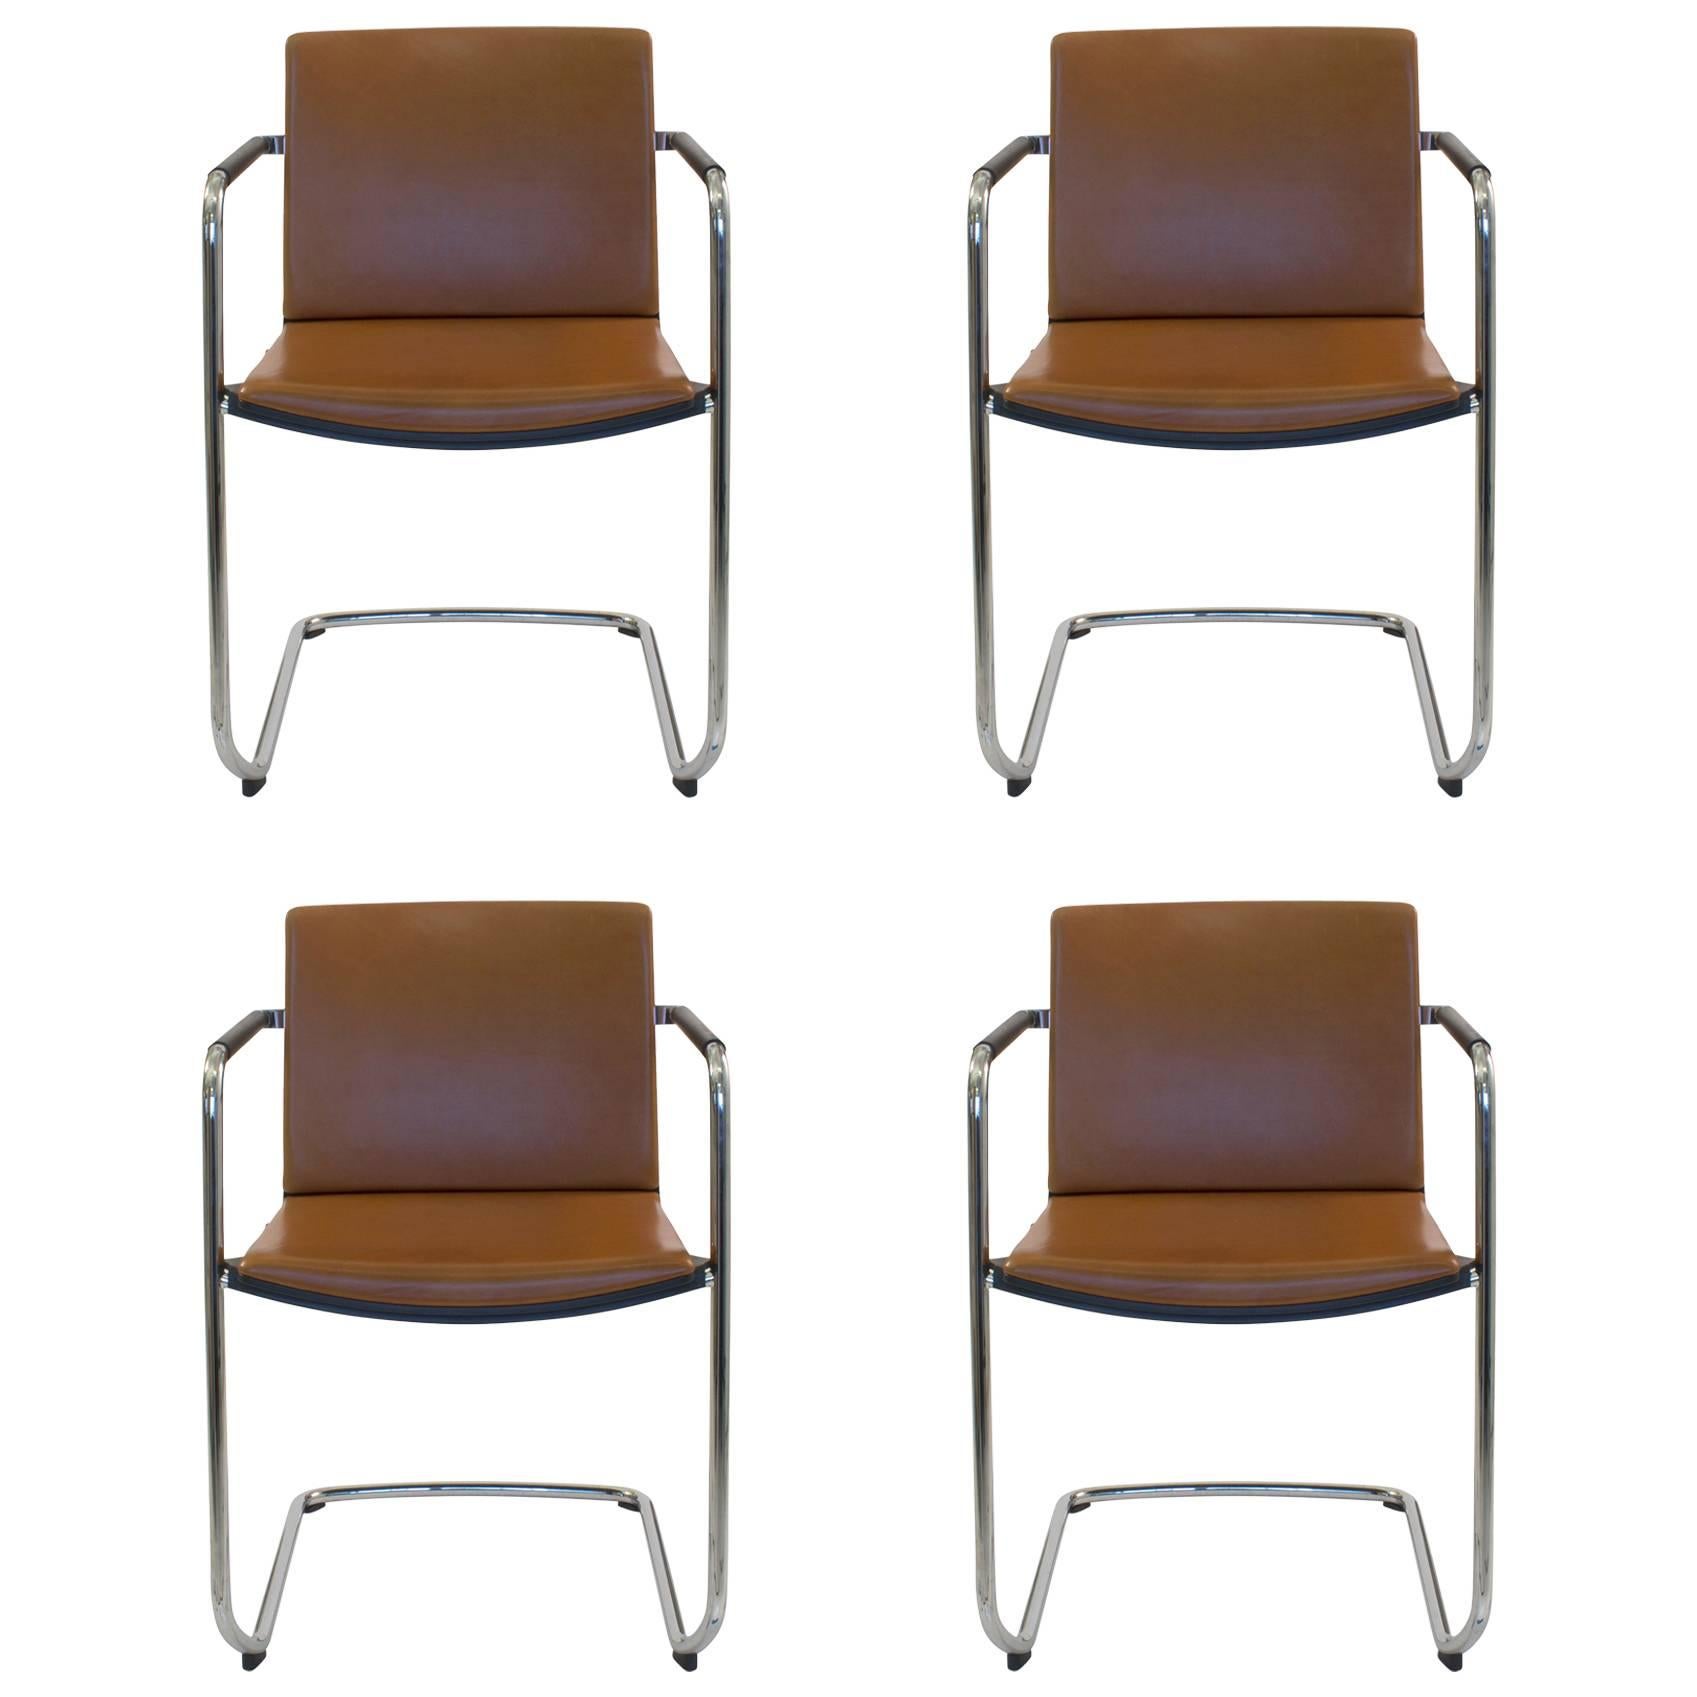 Four Brown Leather Neos 183/3 Cantilever Chair, Wiege for Wilkhahn Germany, Set For Sale